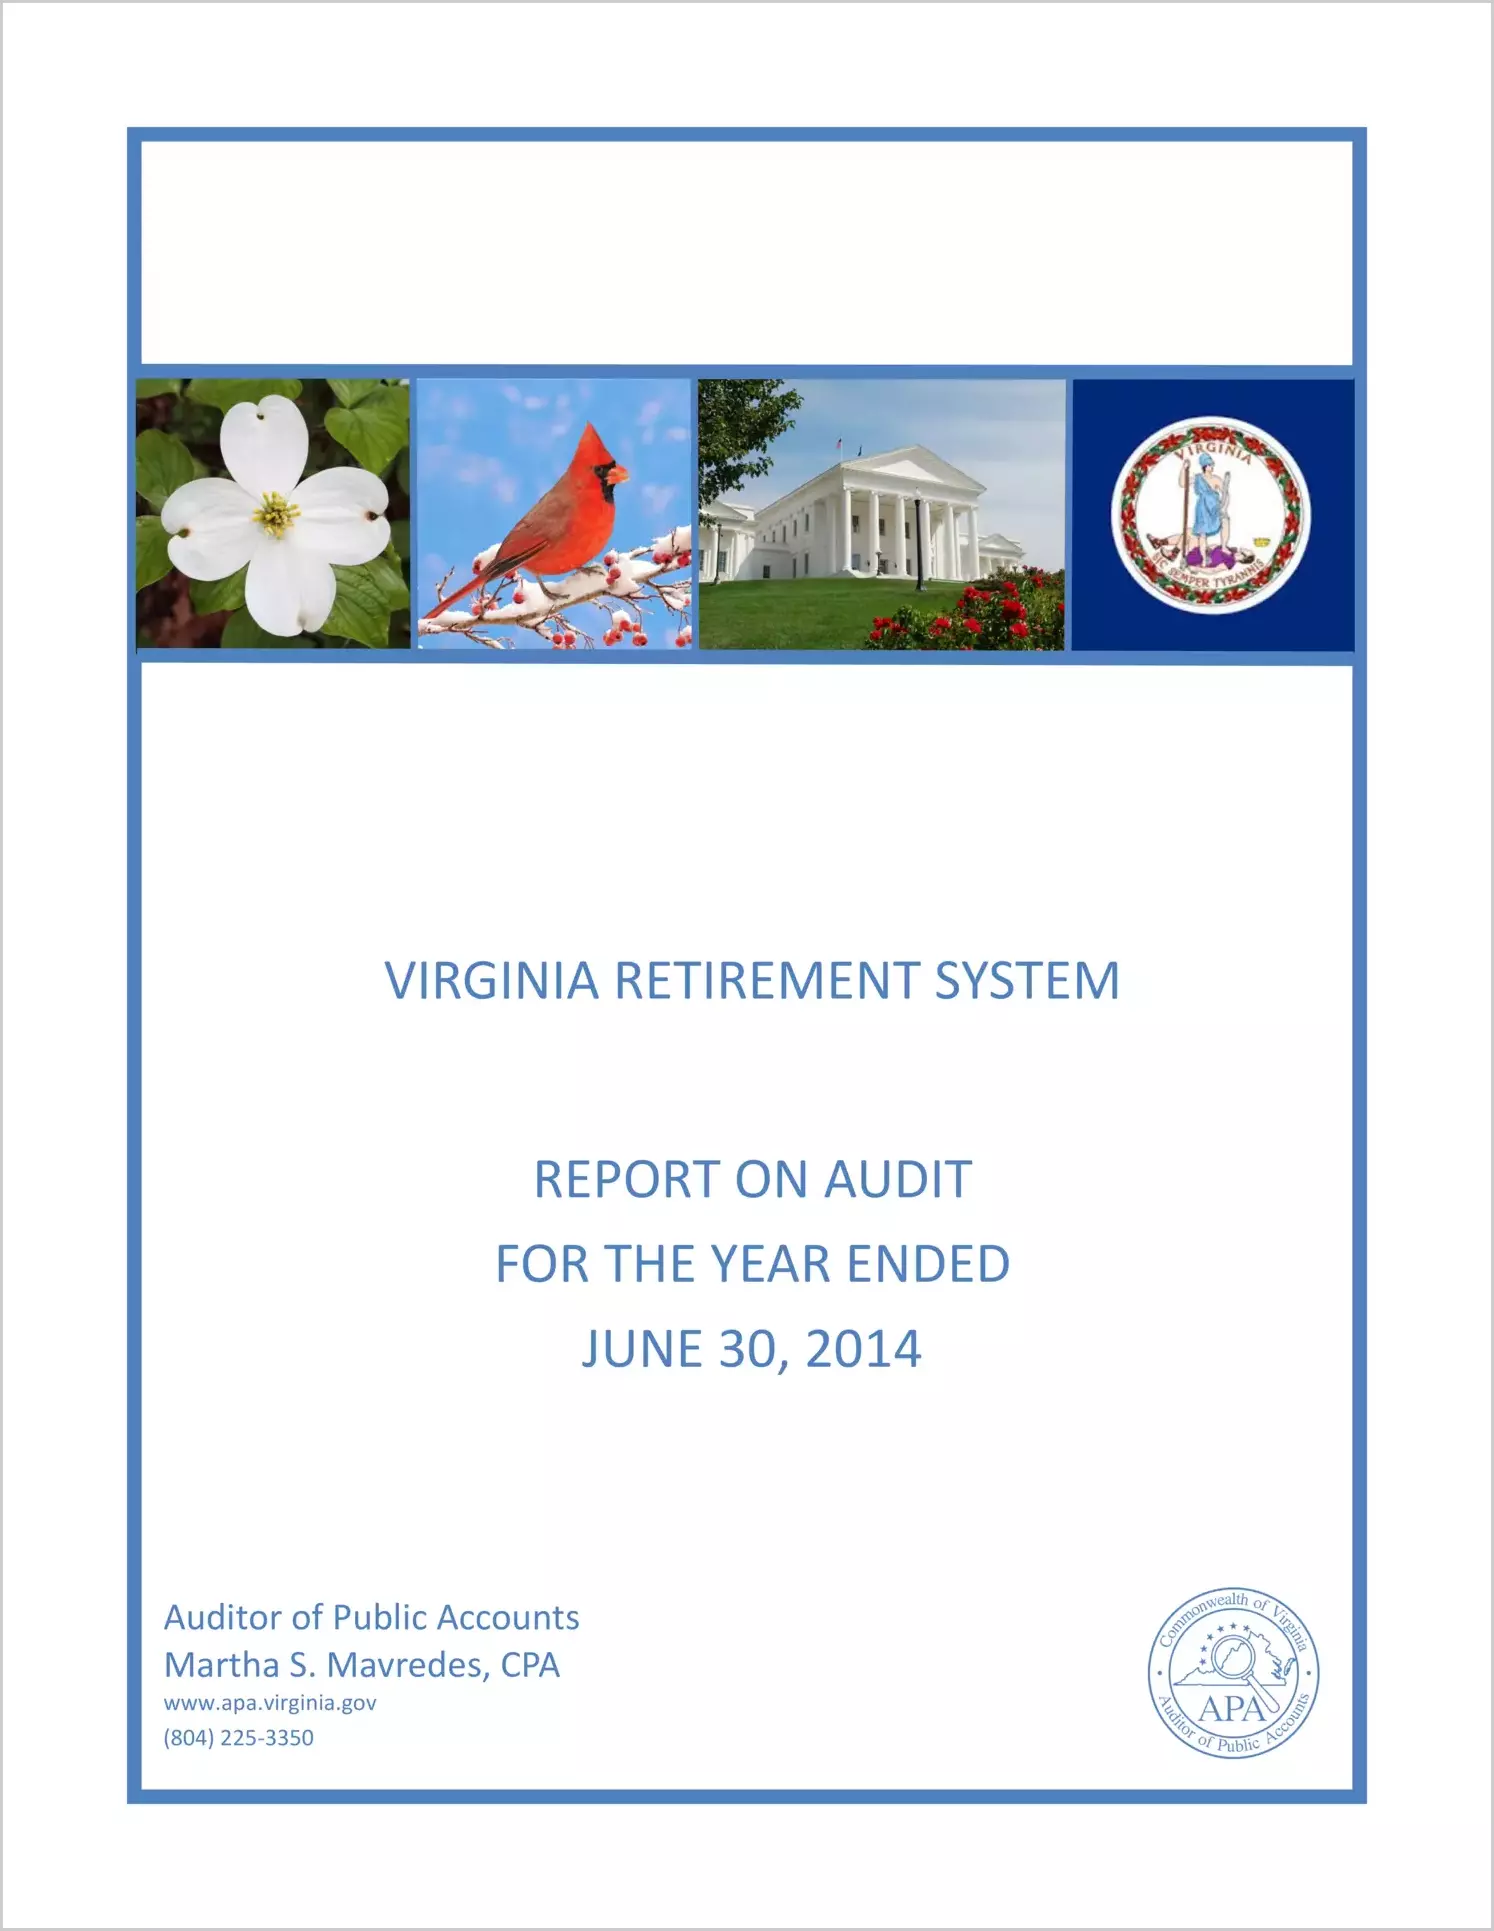 Virginia Retirement System for the year ended June 30, 2014